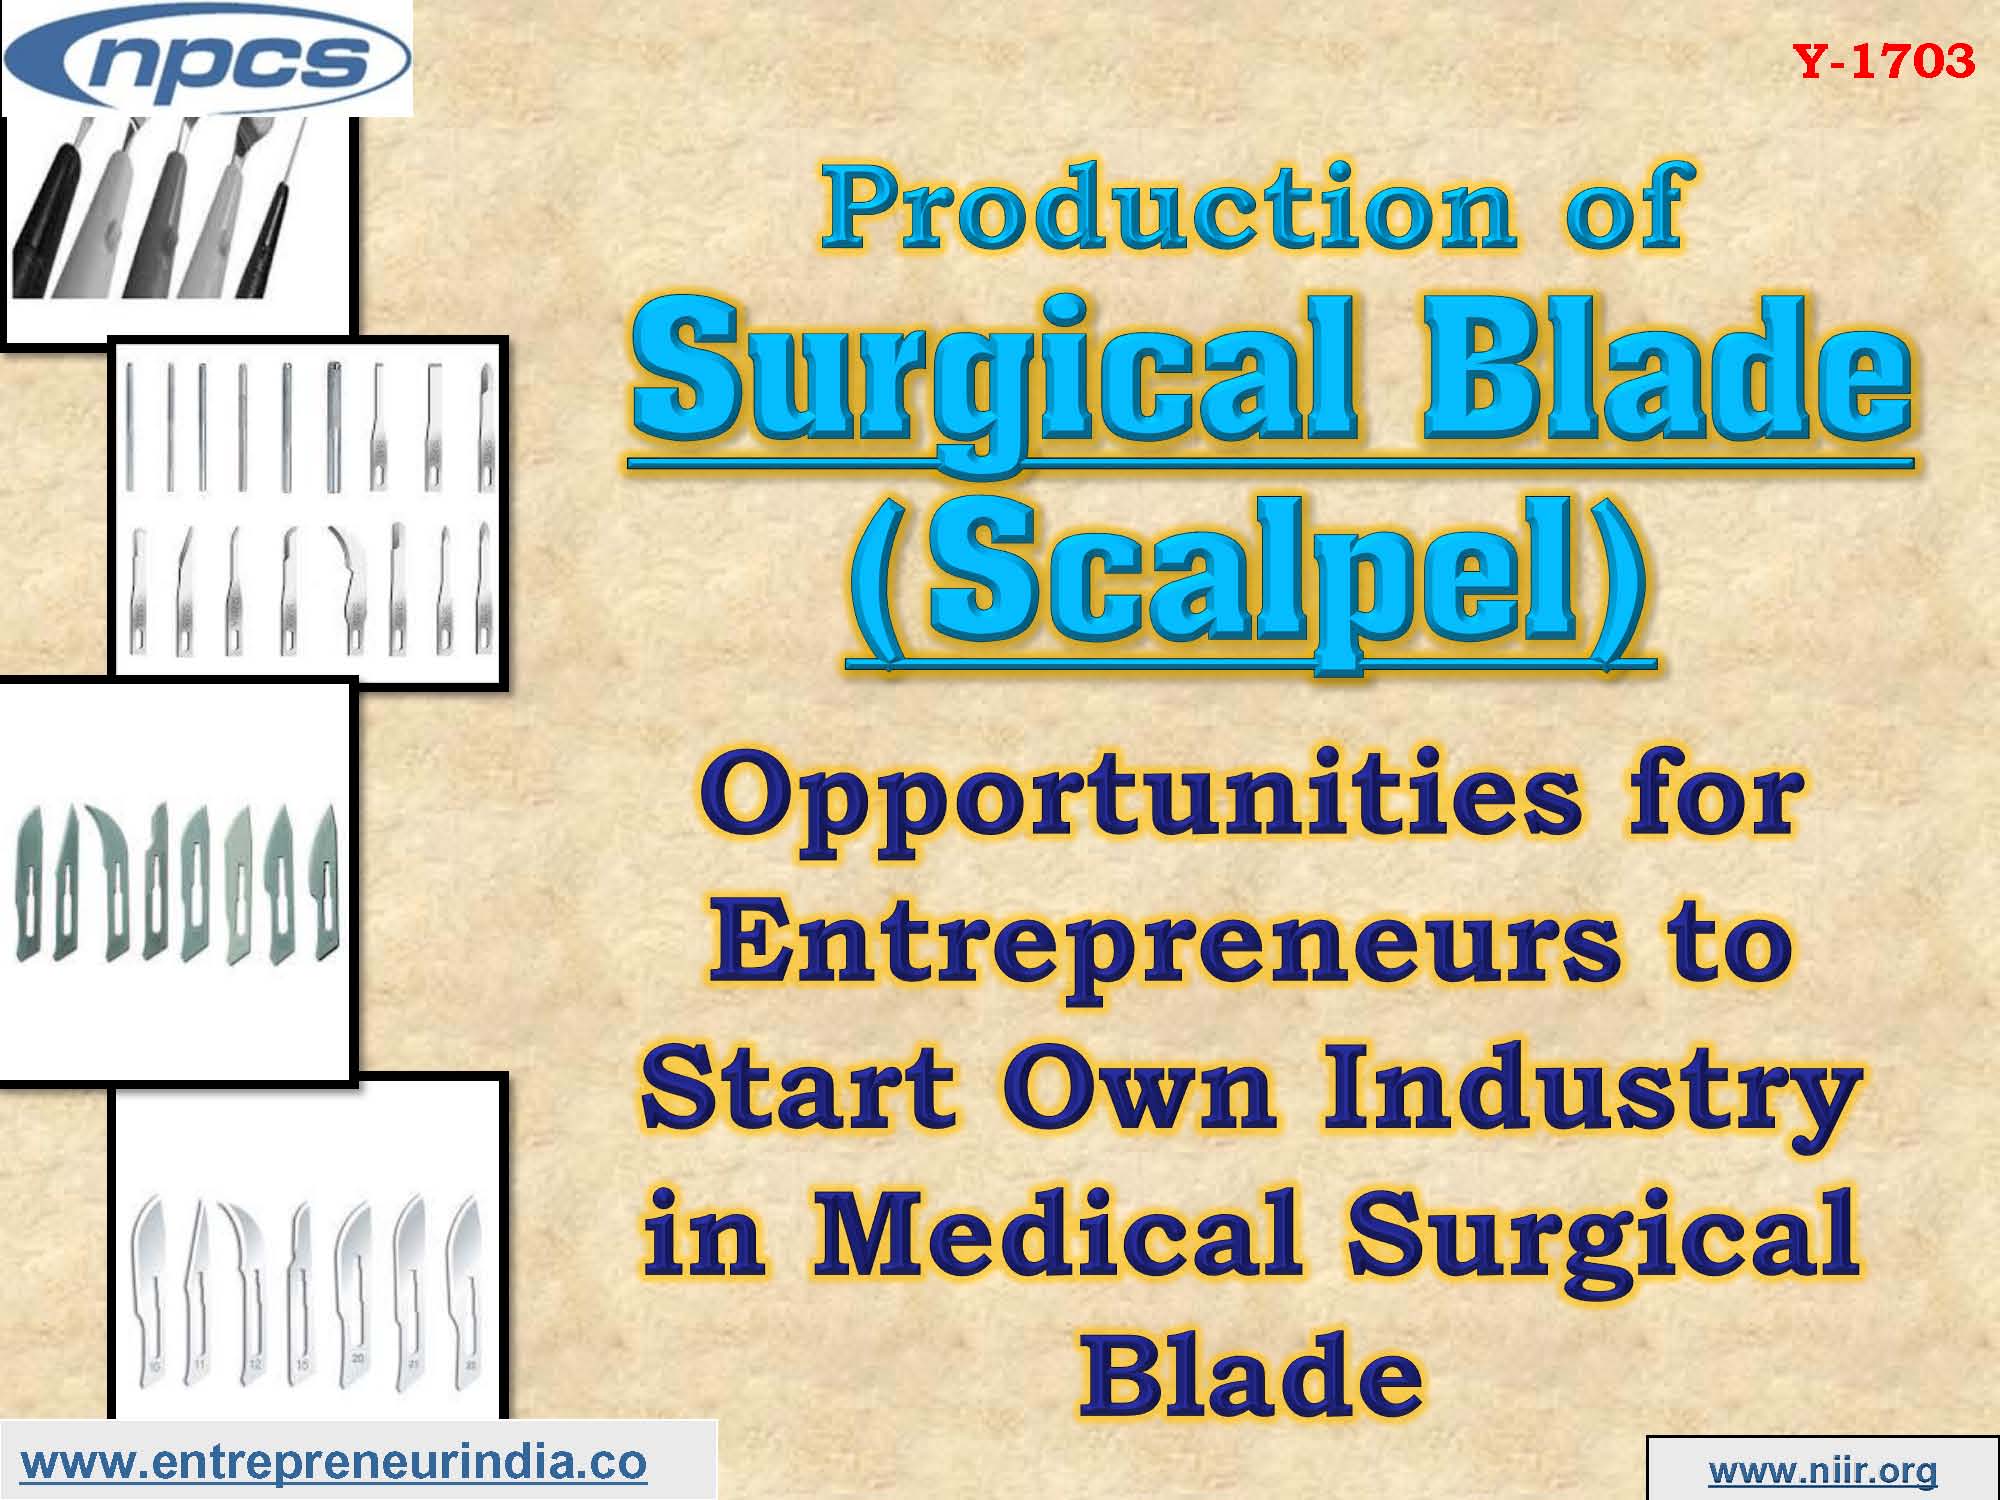 Production of Surgical Blade (Scalpel)